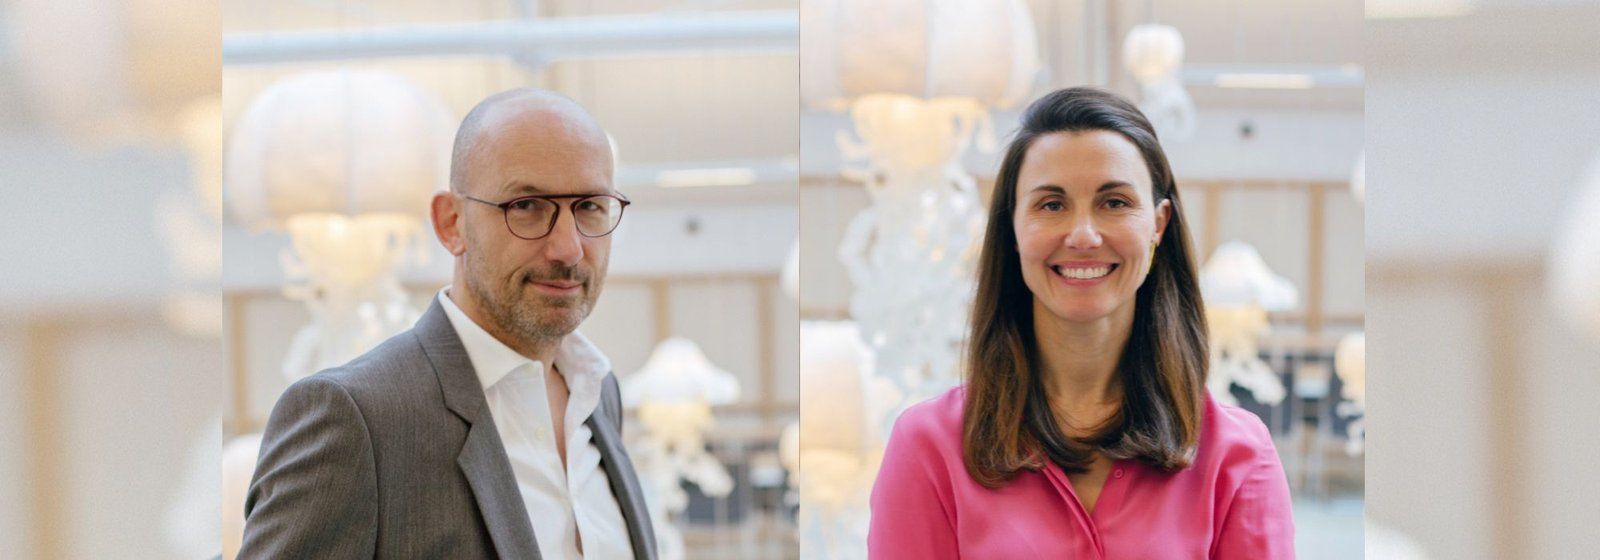 In Conversation With: Pascal Ravessoud And Aurélie Streit Vice President Of FHH On The Three Pillars Of The Forum & More